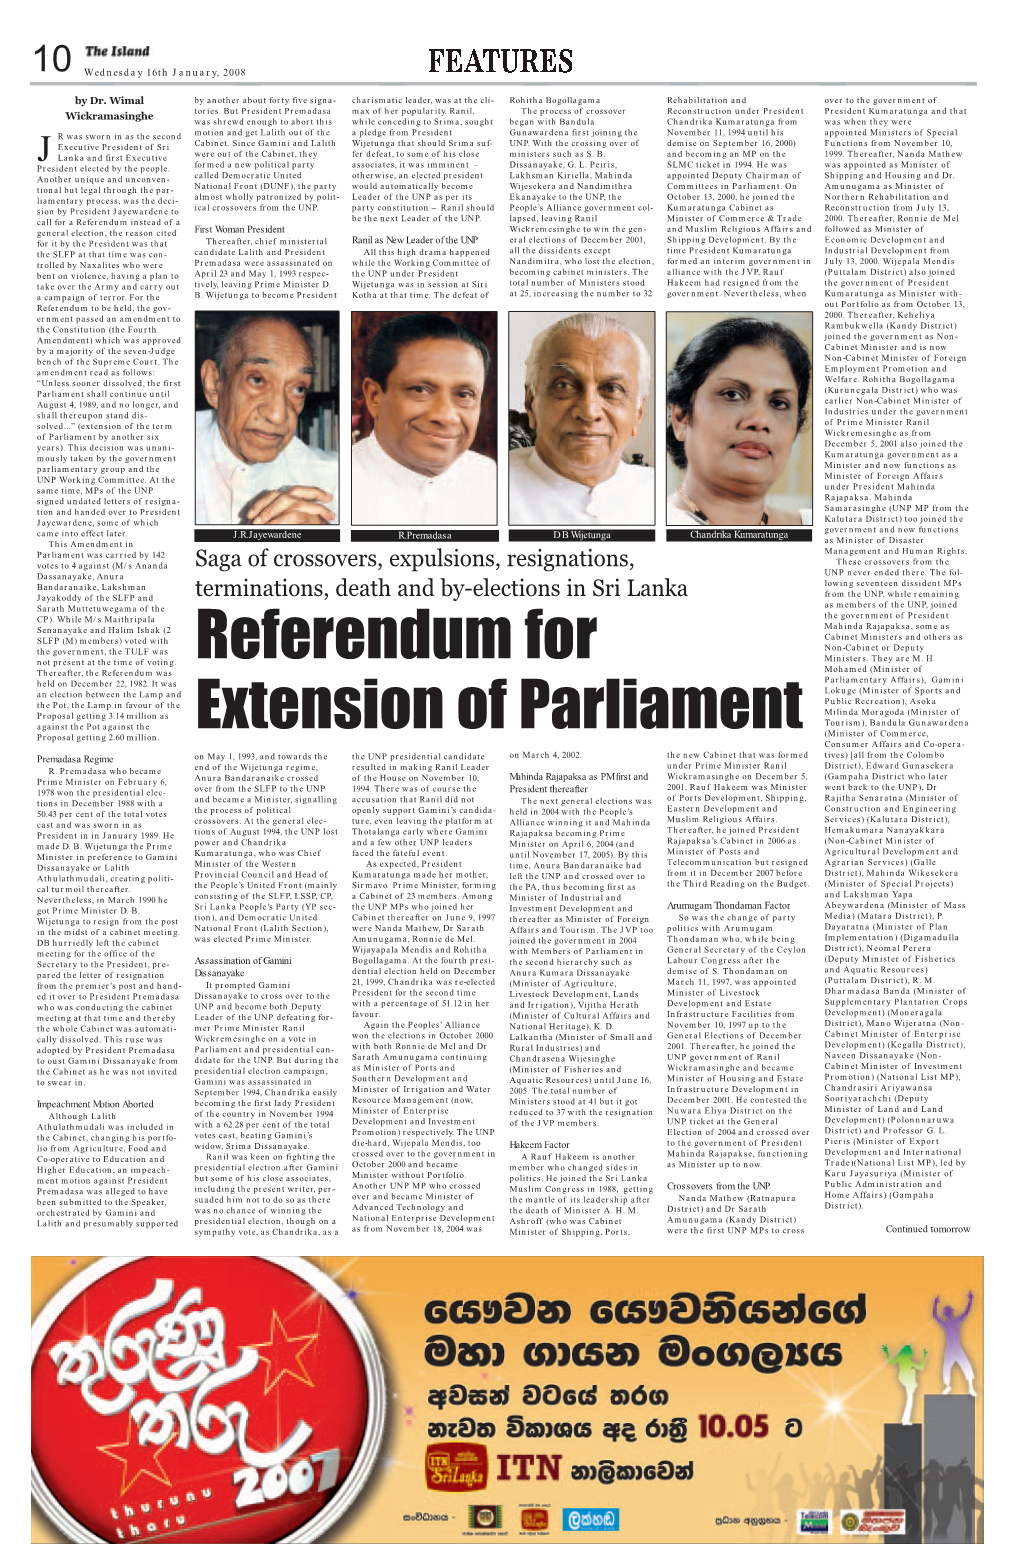 Referendum for Extension of Parliament